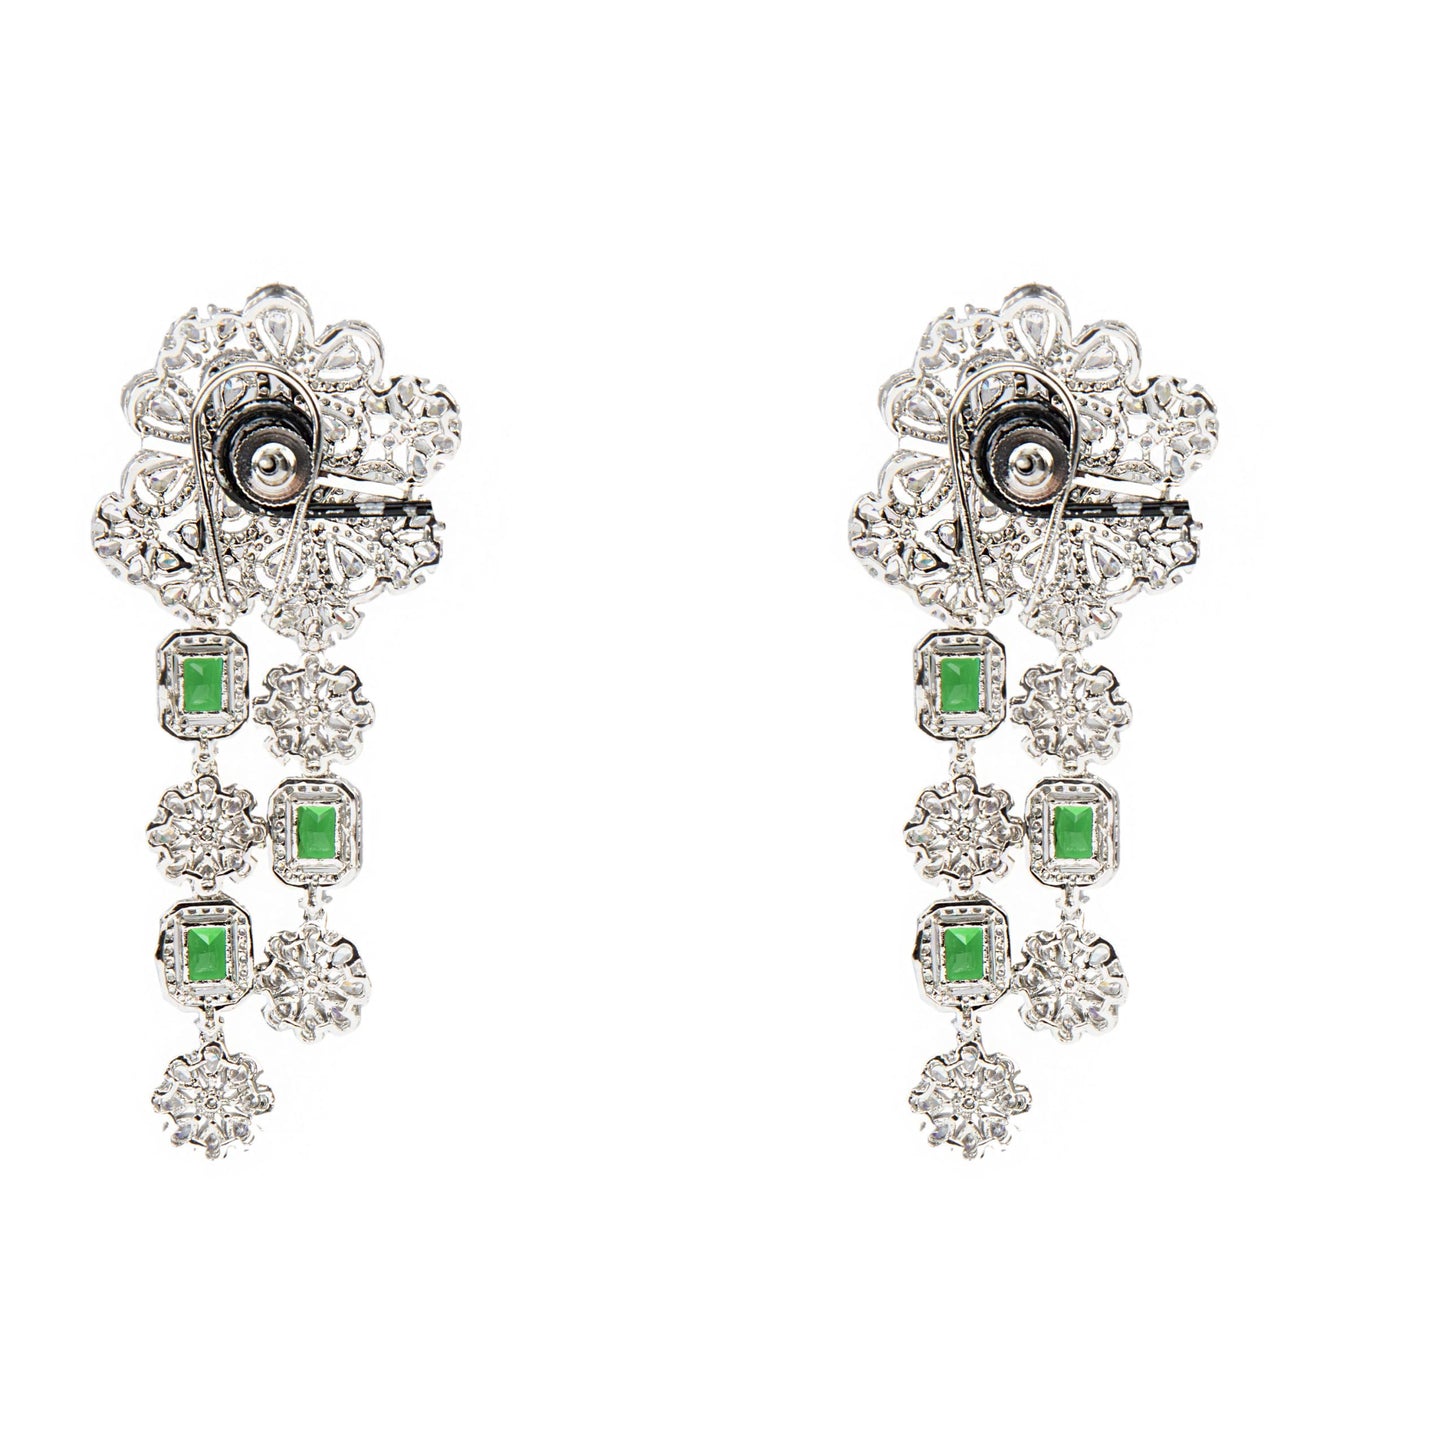 Exquisite Earrings in White and Green Semi Precious Stone finish